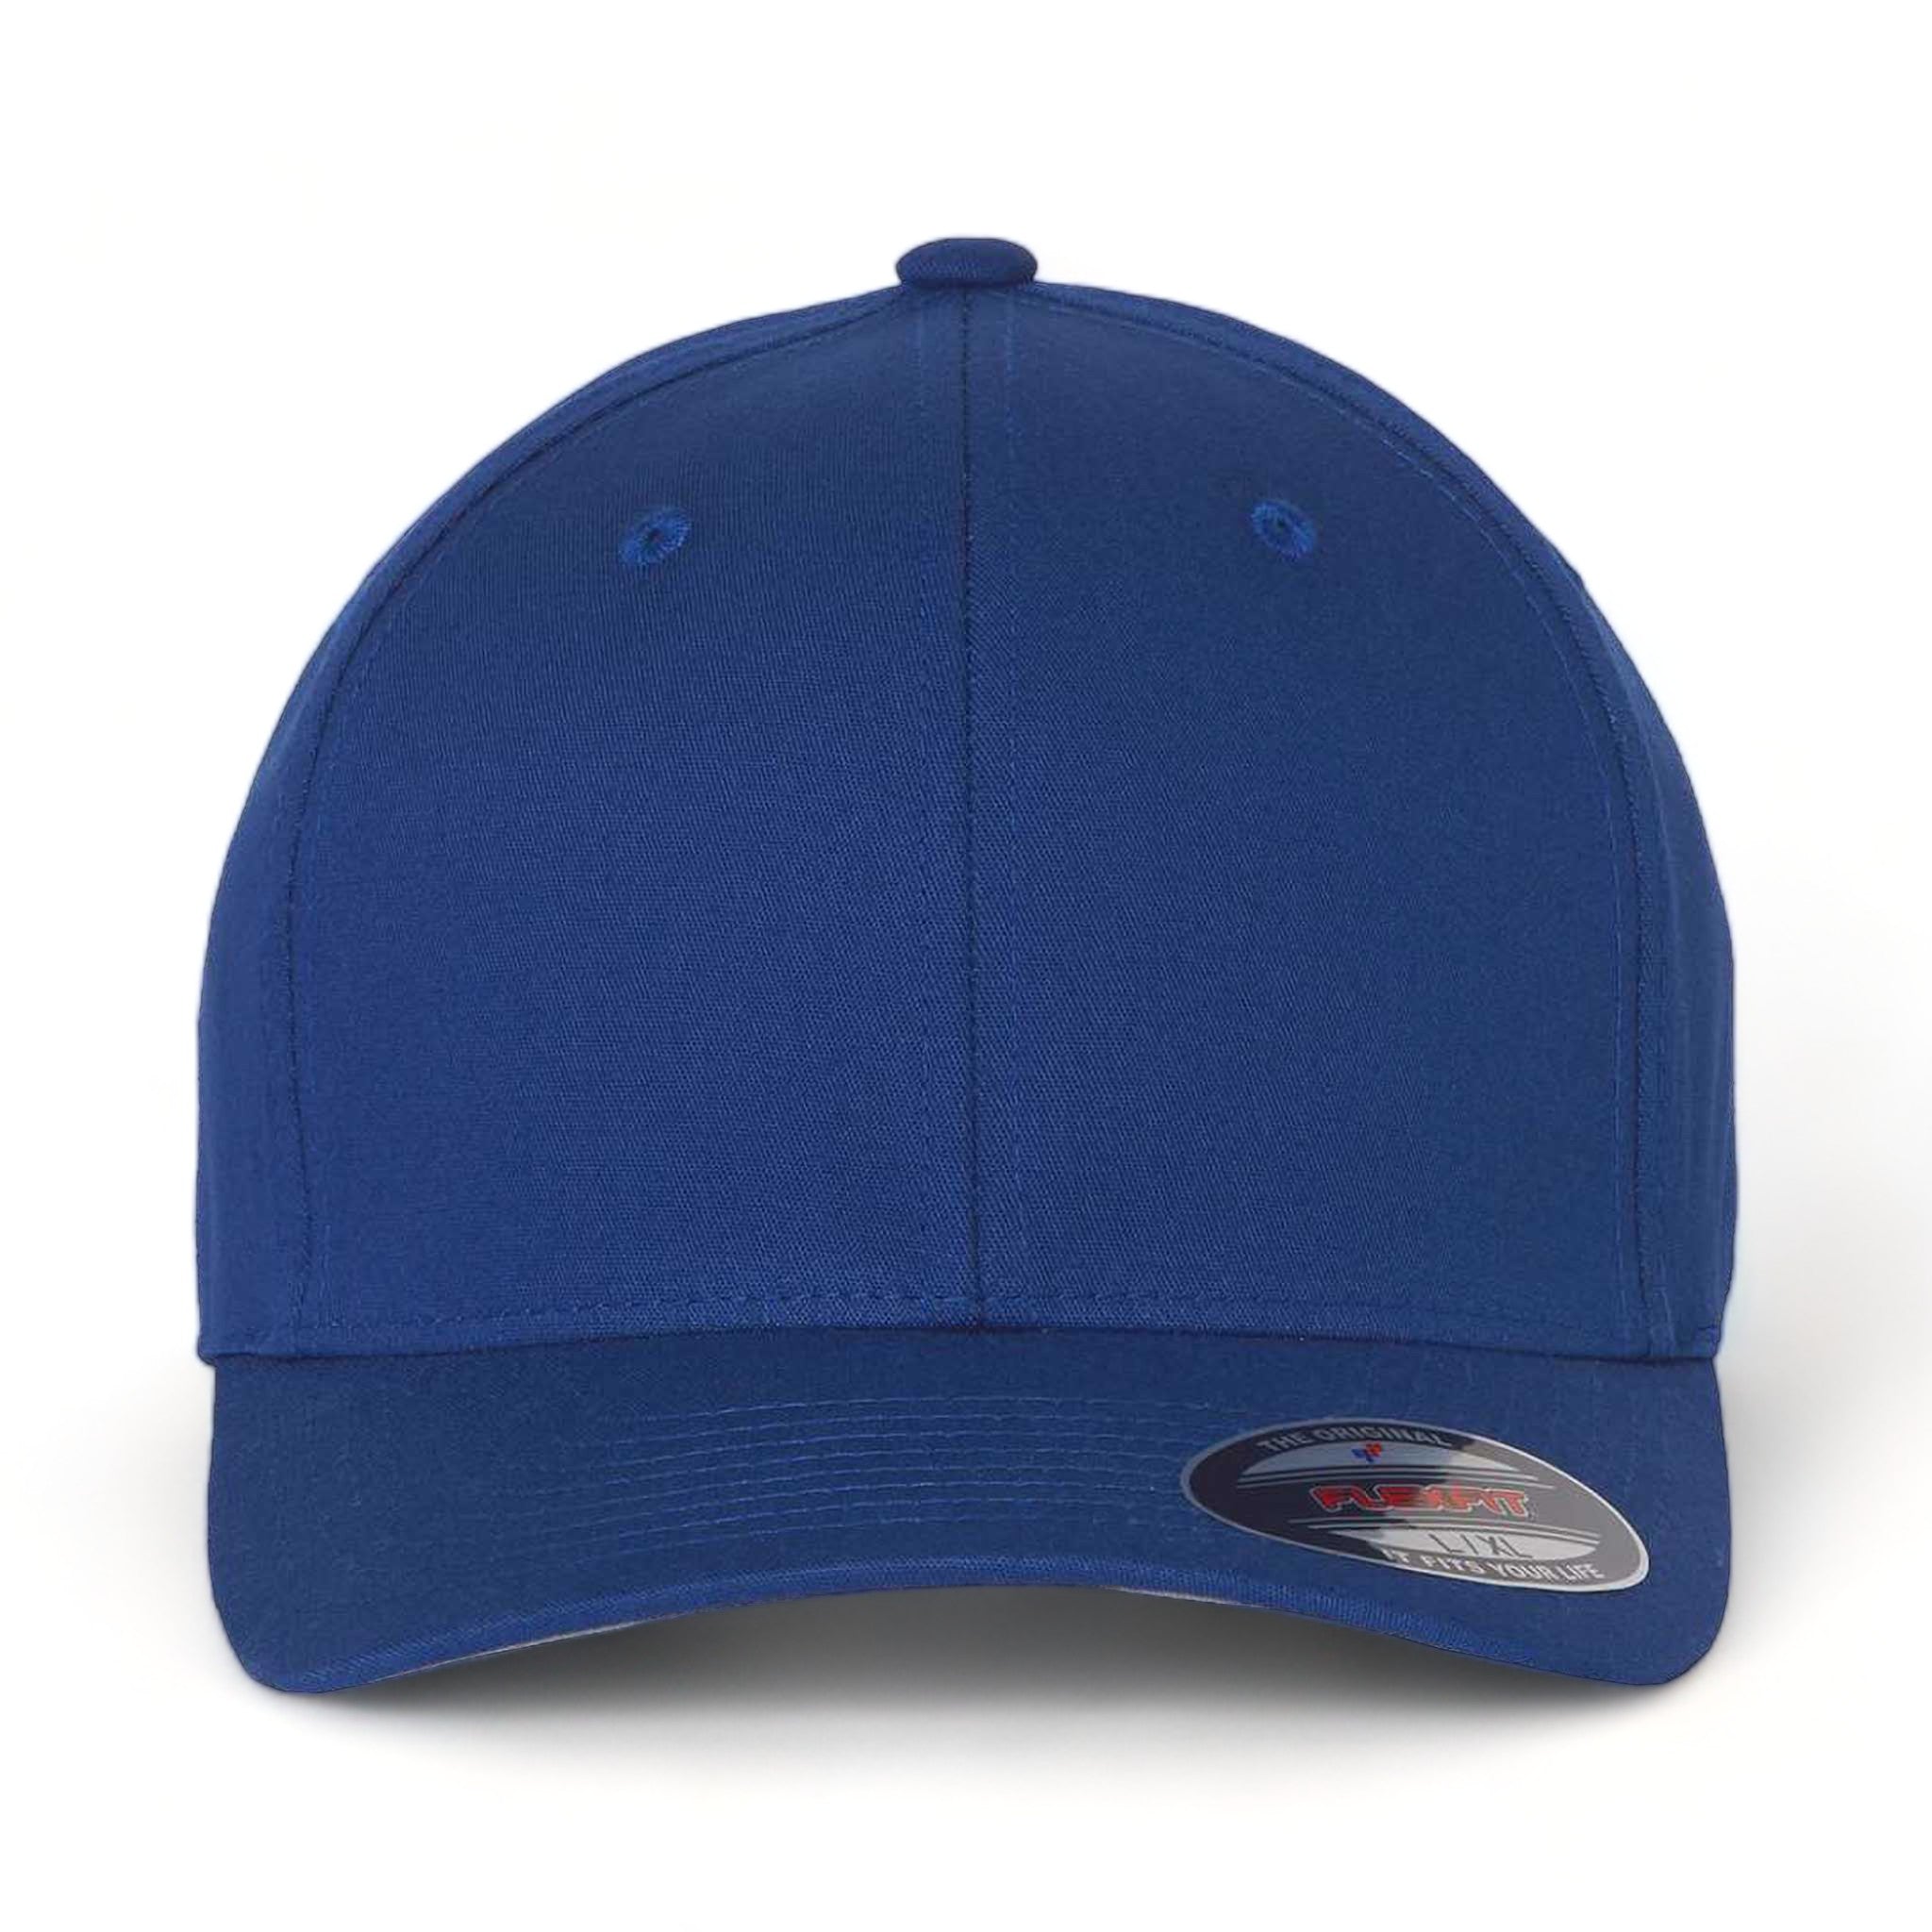 Front view of Flexfit 5001 custom hat in royal blue